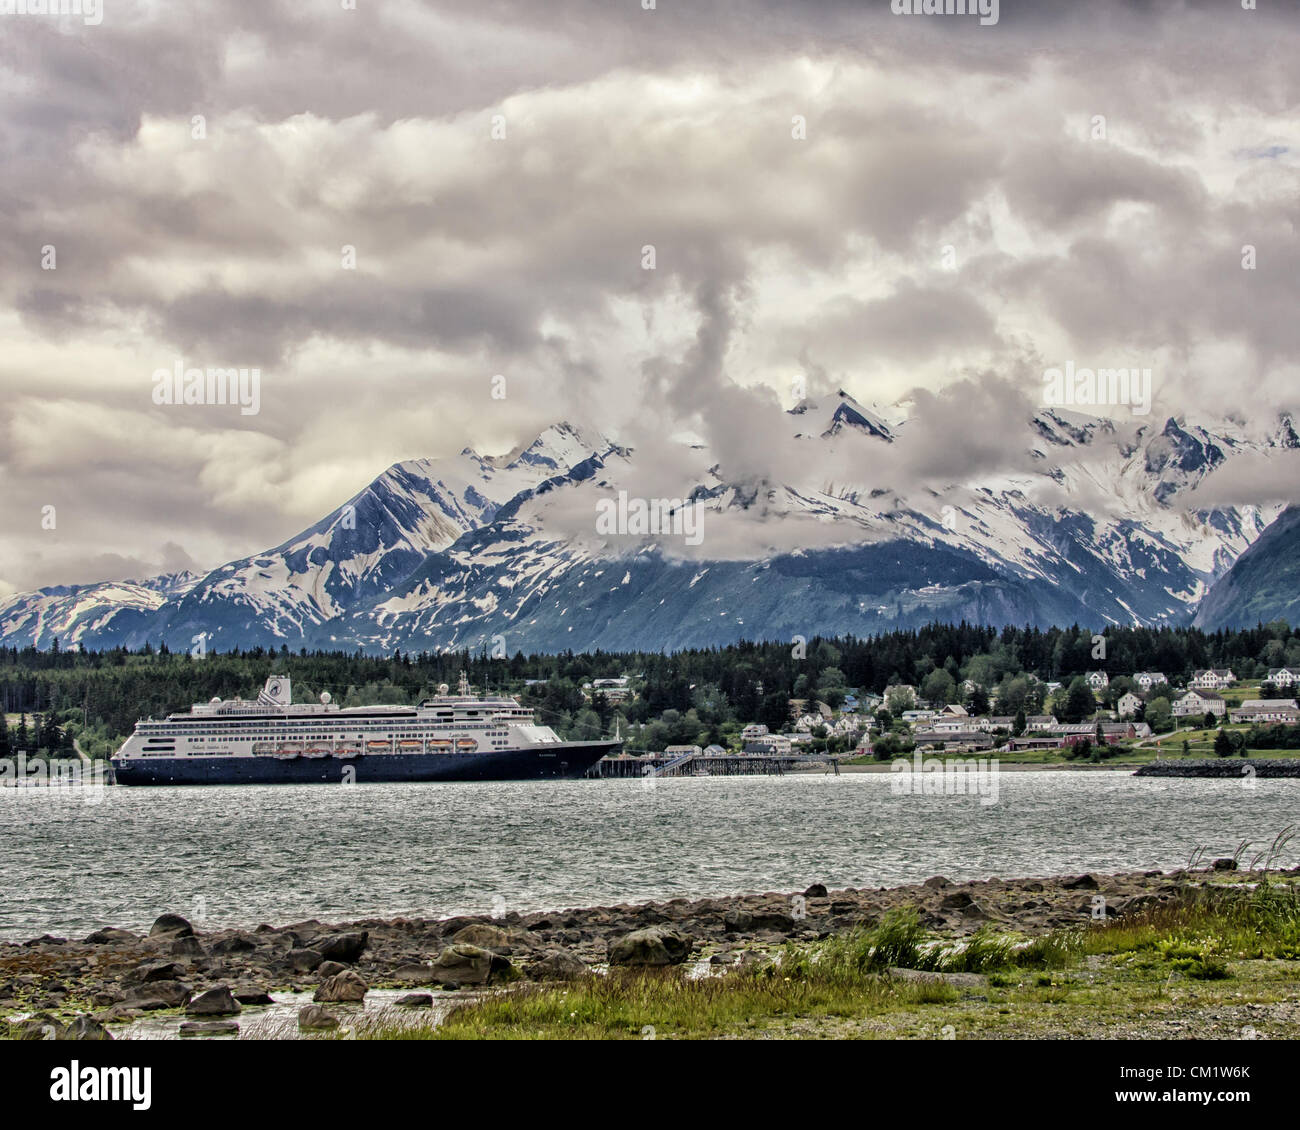 July 4, 2012 - Haines, Alaska, US - The ms Zaandam, a Holland America Line cruise ship, docked in Portage Cove at Haines, Alaska, with dramatic clouds and the majestic Chilkat Mountain Range as a spectacular backdrop. (Credit Image: © Arnold Drapkin/ZUMAPRESS.com) Stock Photo